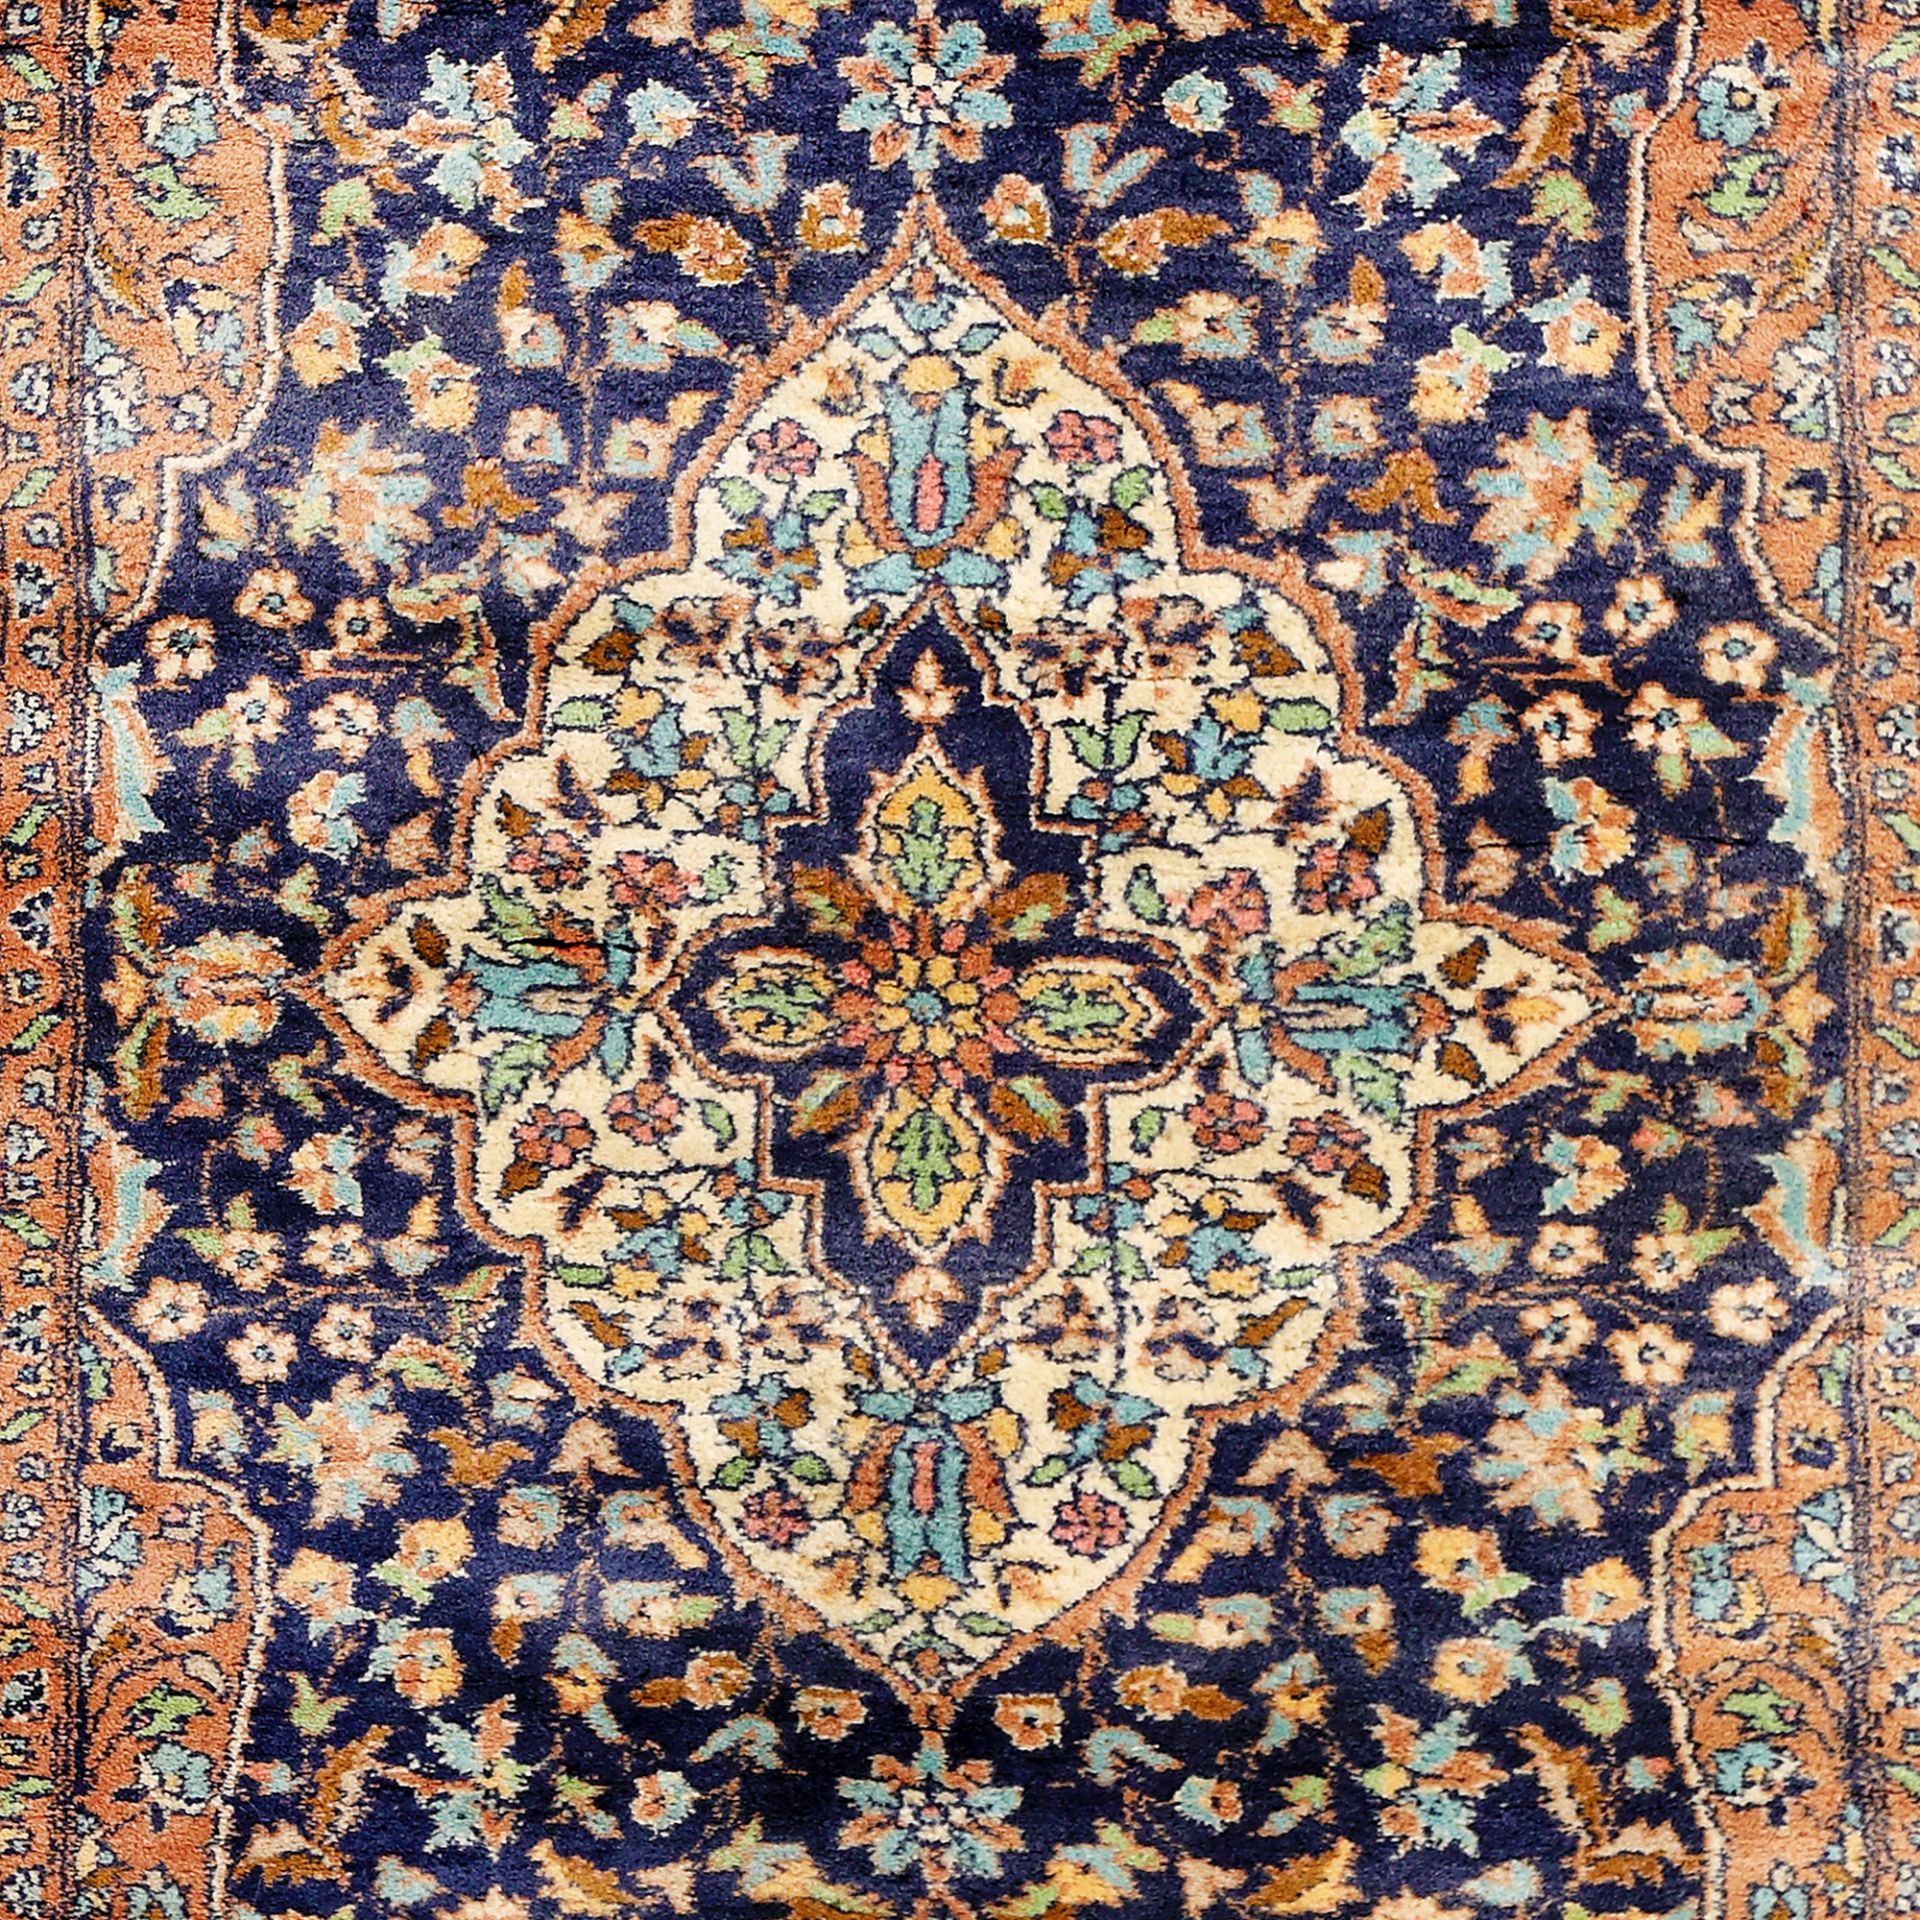 Tabriz wool rug, decorated with decorative friezes and palmettes, Iran - Image 2 of 2